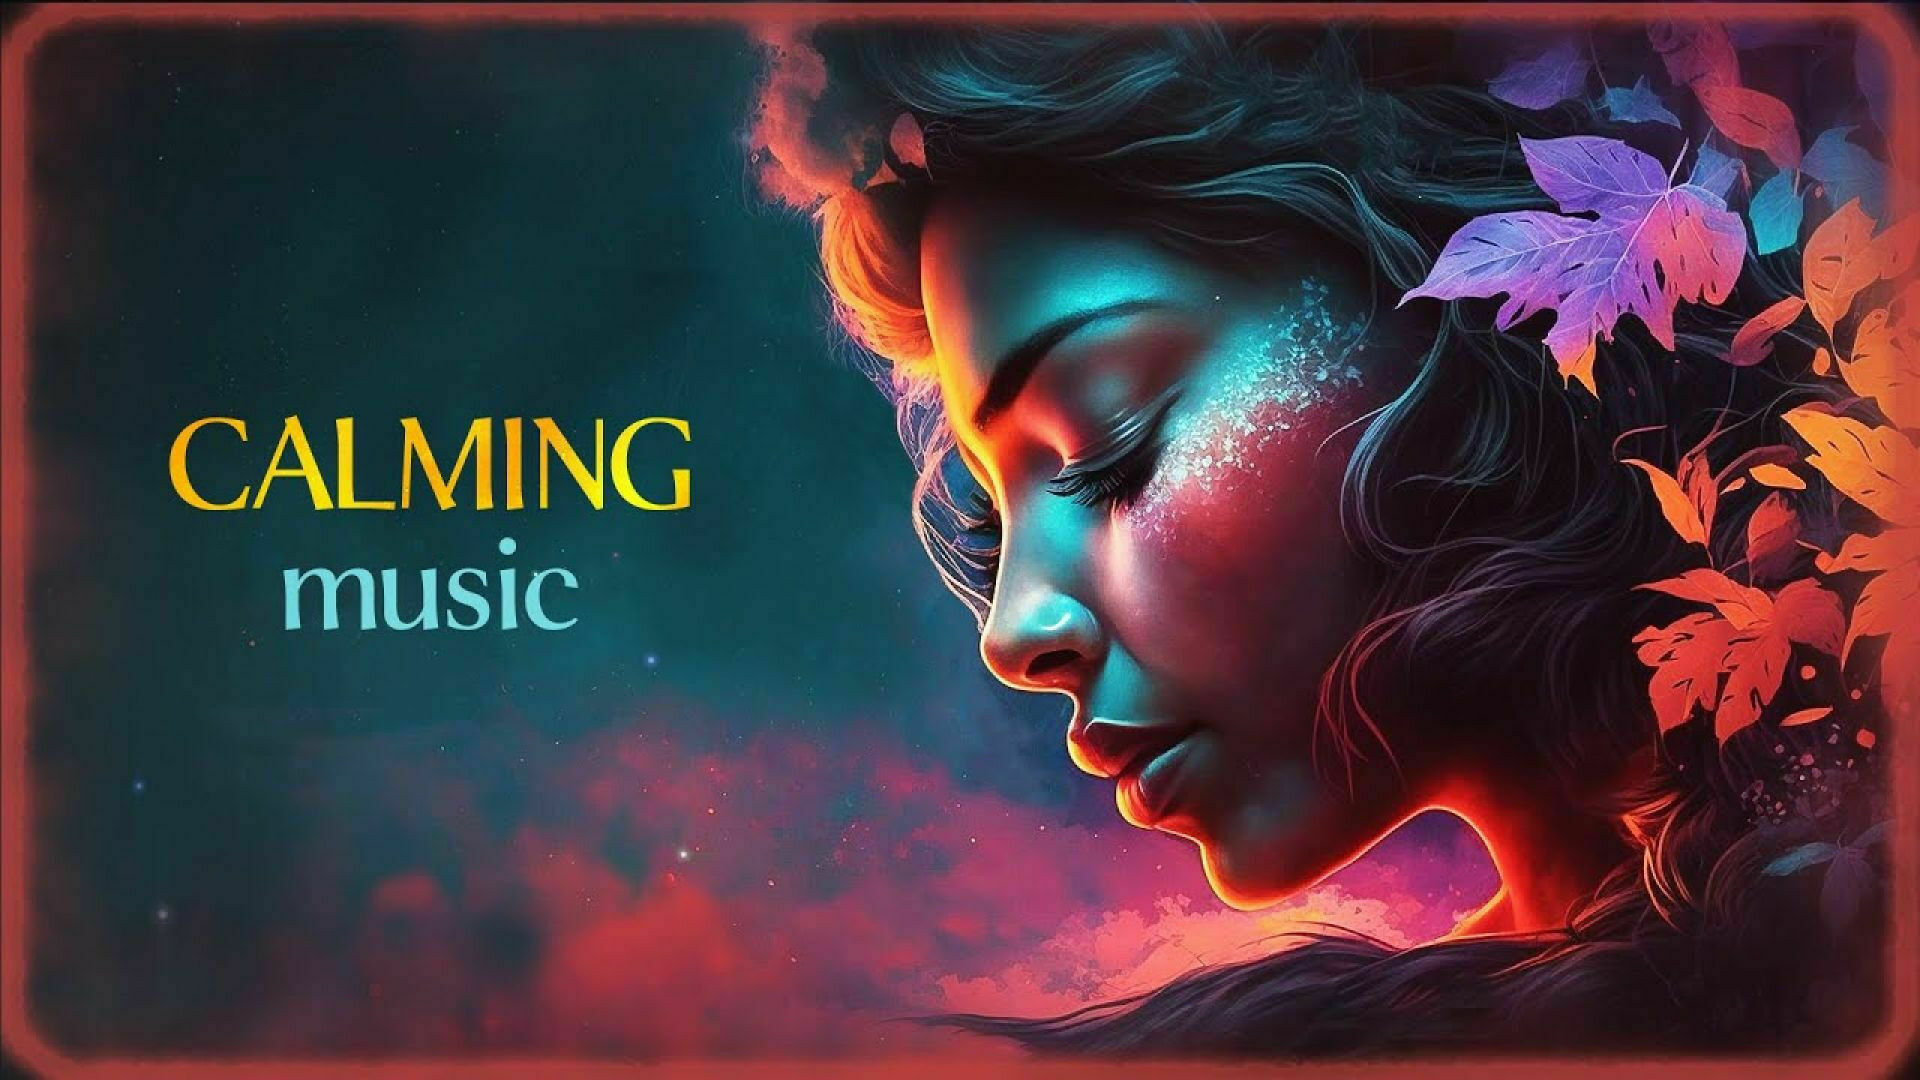 Calming Music To Clear Your Mind - Relaxing Soothing Beautiful And Tranquil Music For Sleep